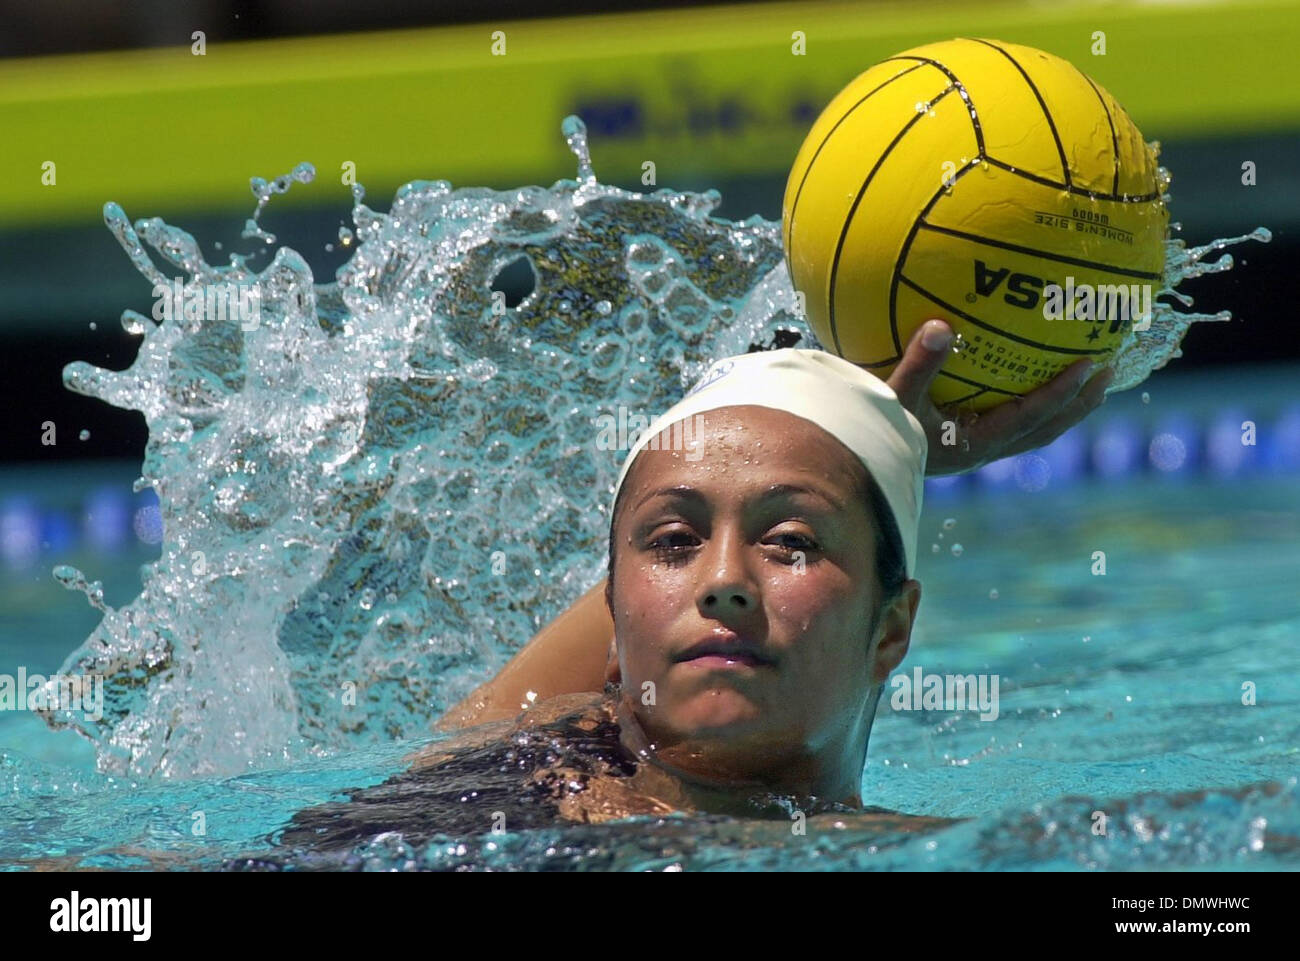 Jun 16, 2001; Berkeley, CA, USA; U.S. Women's National Water Polo team  player Brenda Villa, #4, practices before the start of their exhibition  game against Australia at the Cal Spieker Aquatic Center